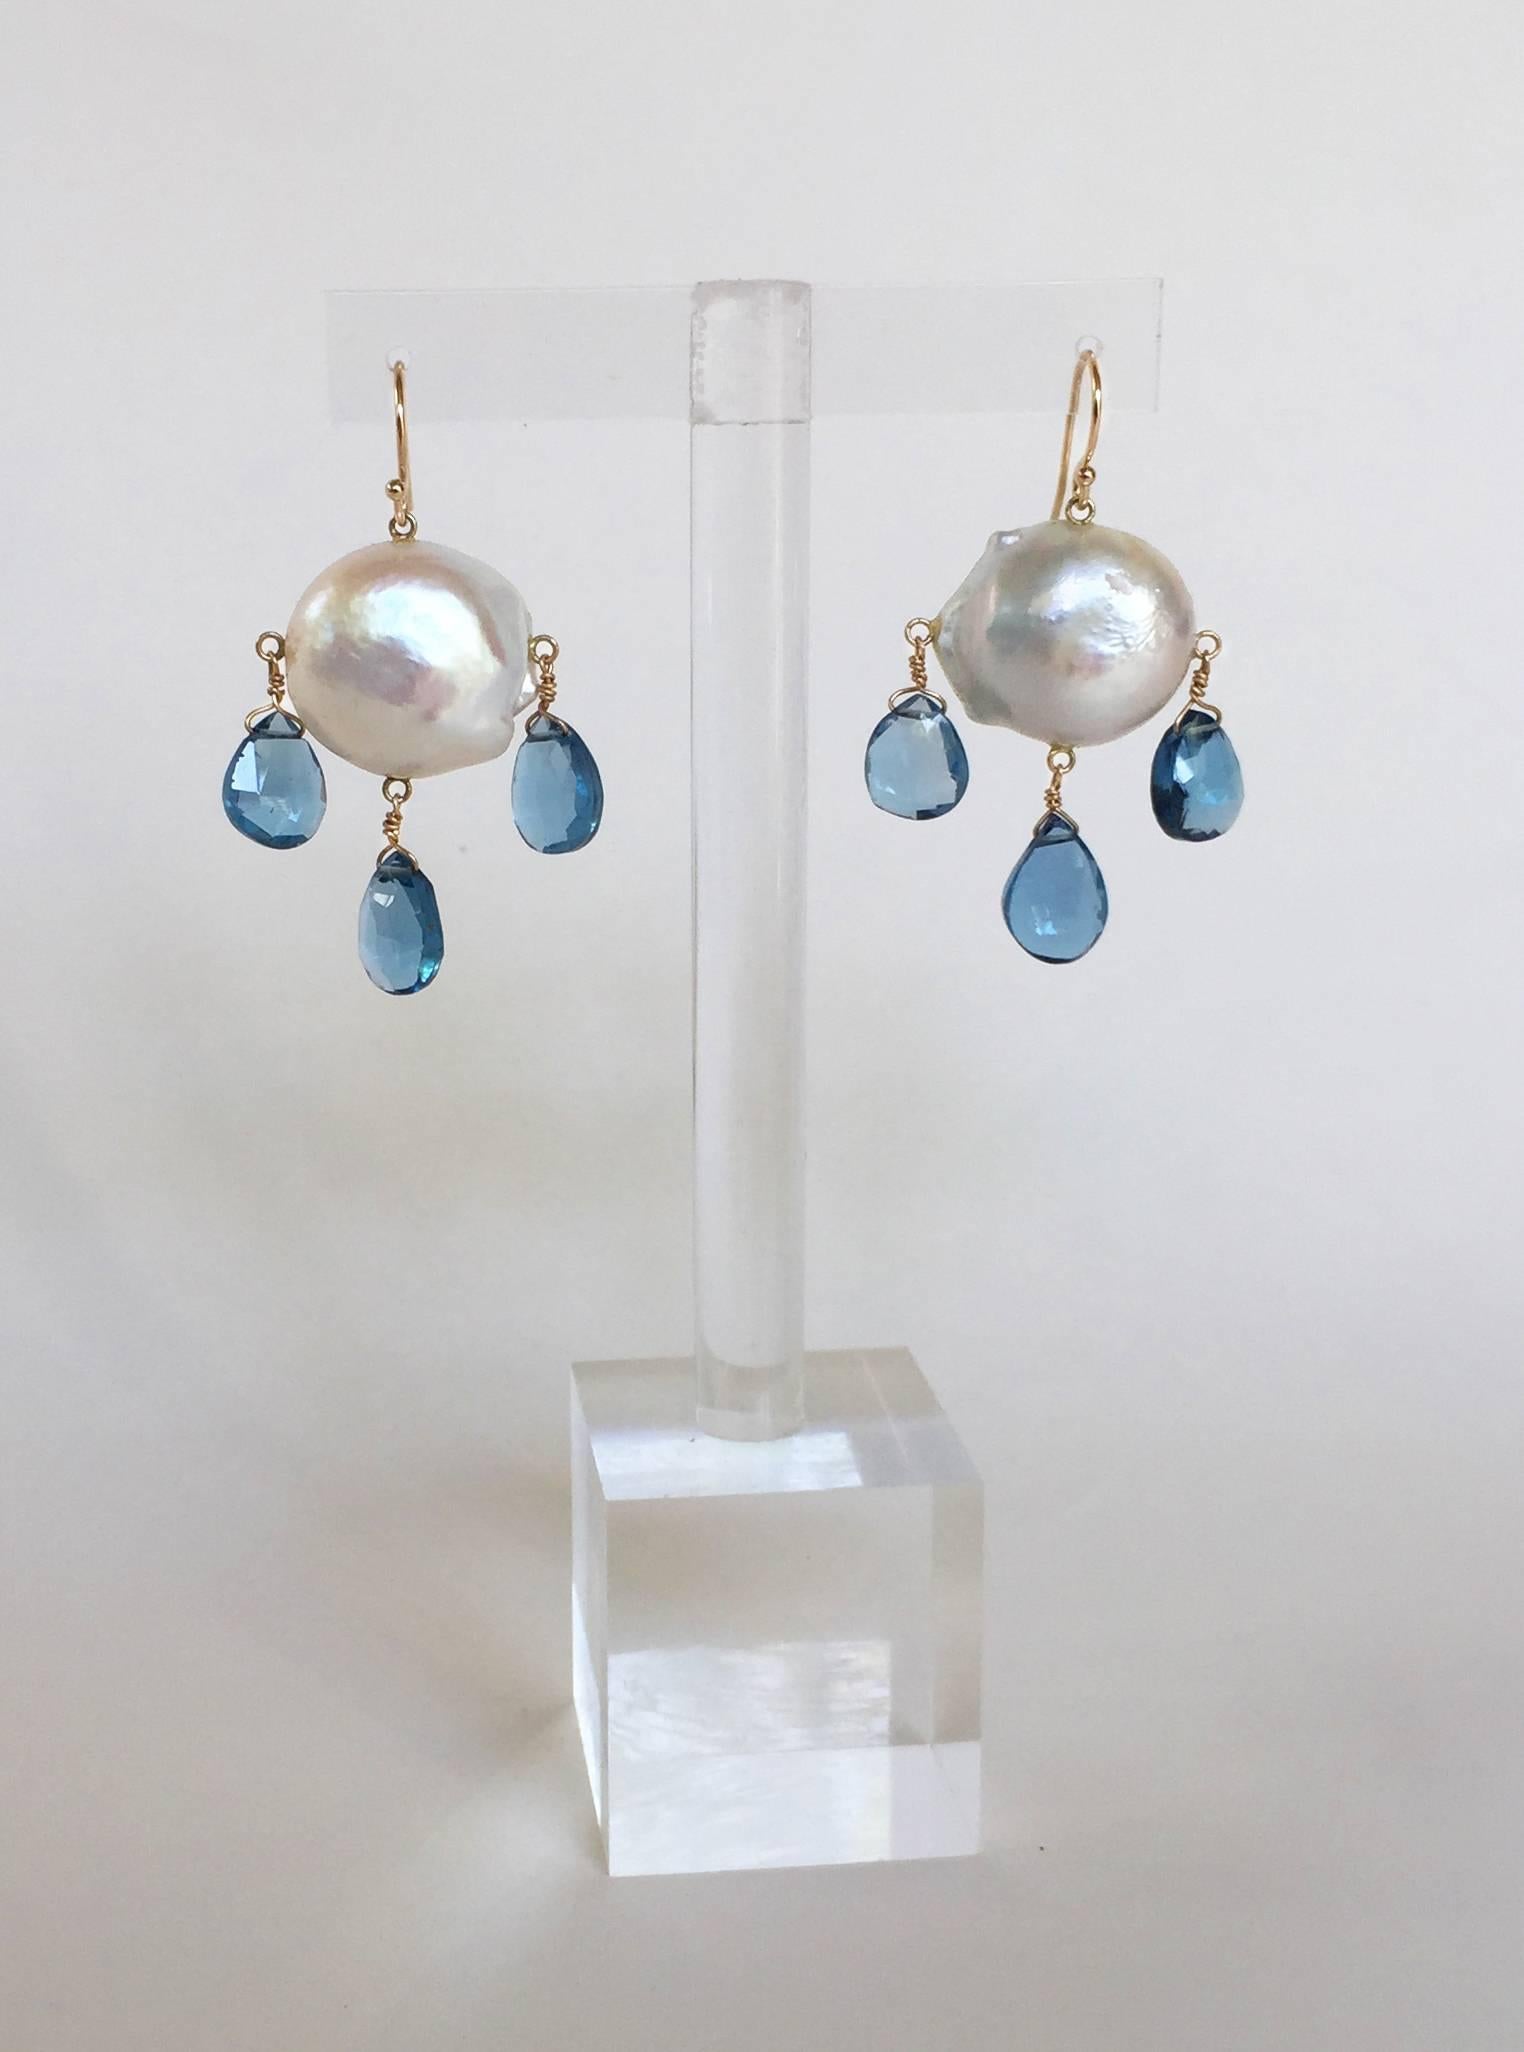 Three London blue topaz droplets hang from a large round Baroque white pearl, by a 14k yellow gold hook and wiring. They hang perfectly at 1.65 inches. These beautiful and bold earrings add a graceful touch to your outfit. 